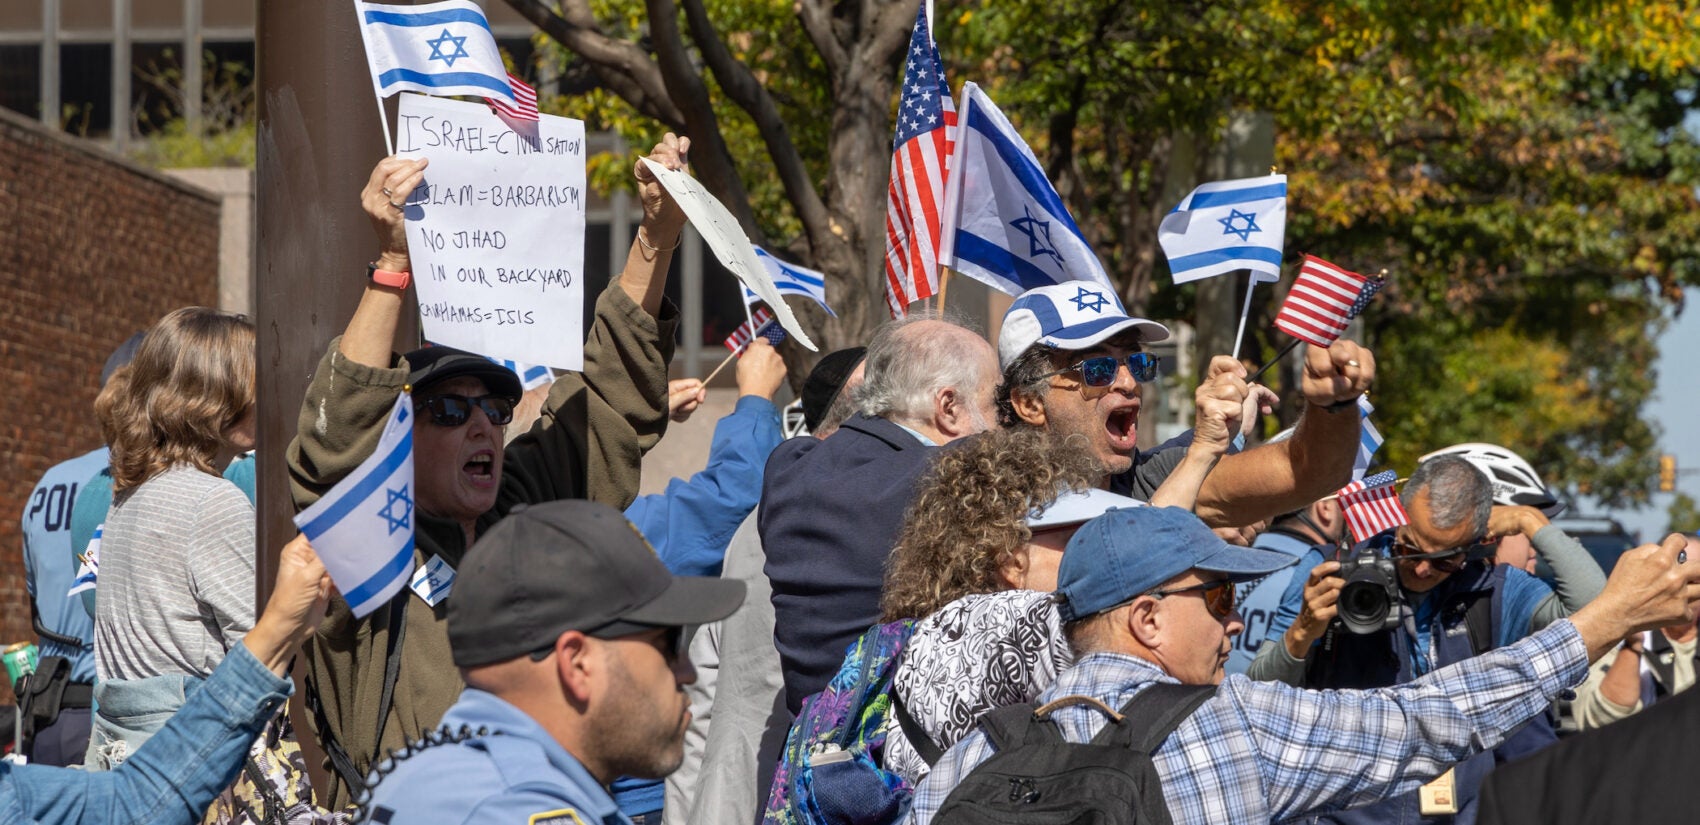 Israeli supporters counter a protest in support of Palestine.